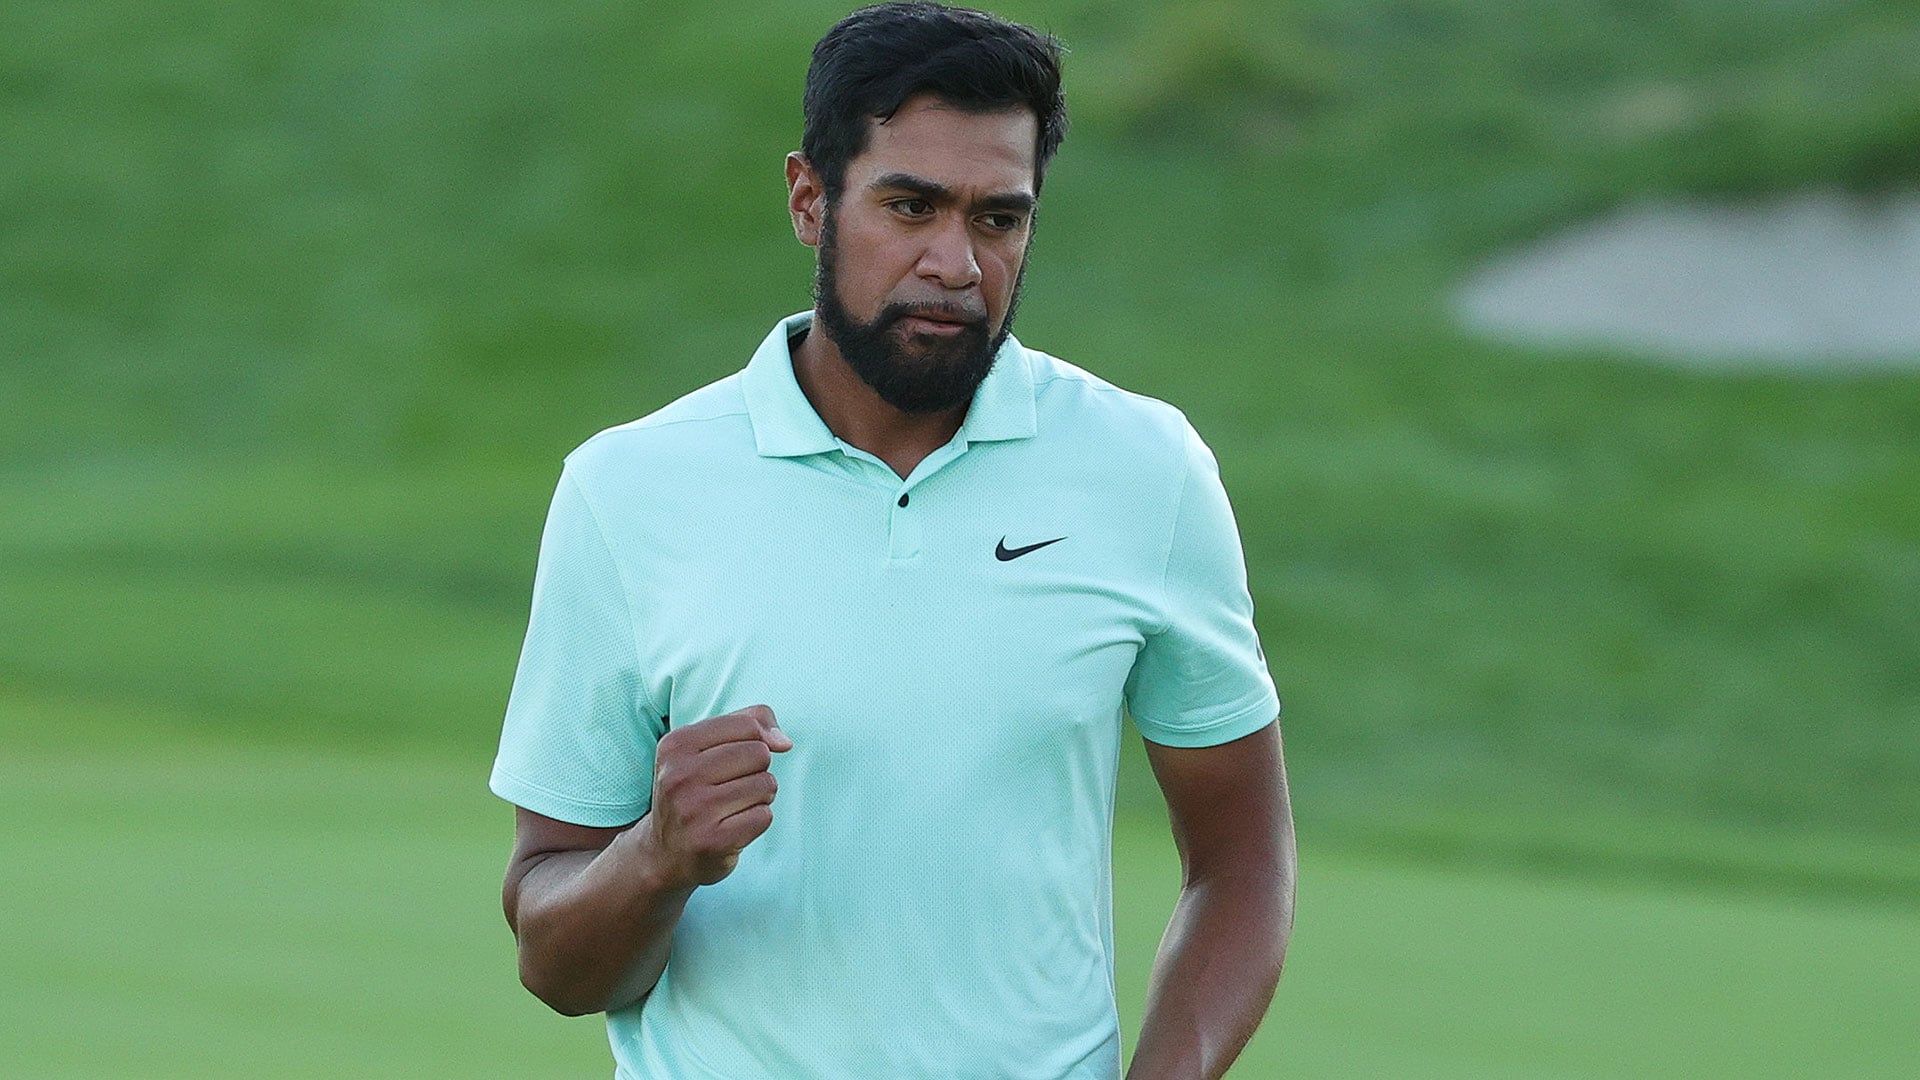 Tony Finau ends five-year winless drought on PGA Tour with playoff win at Northern Trust